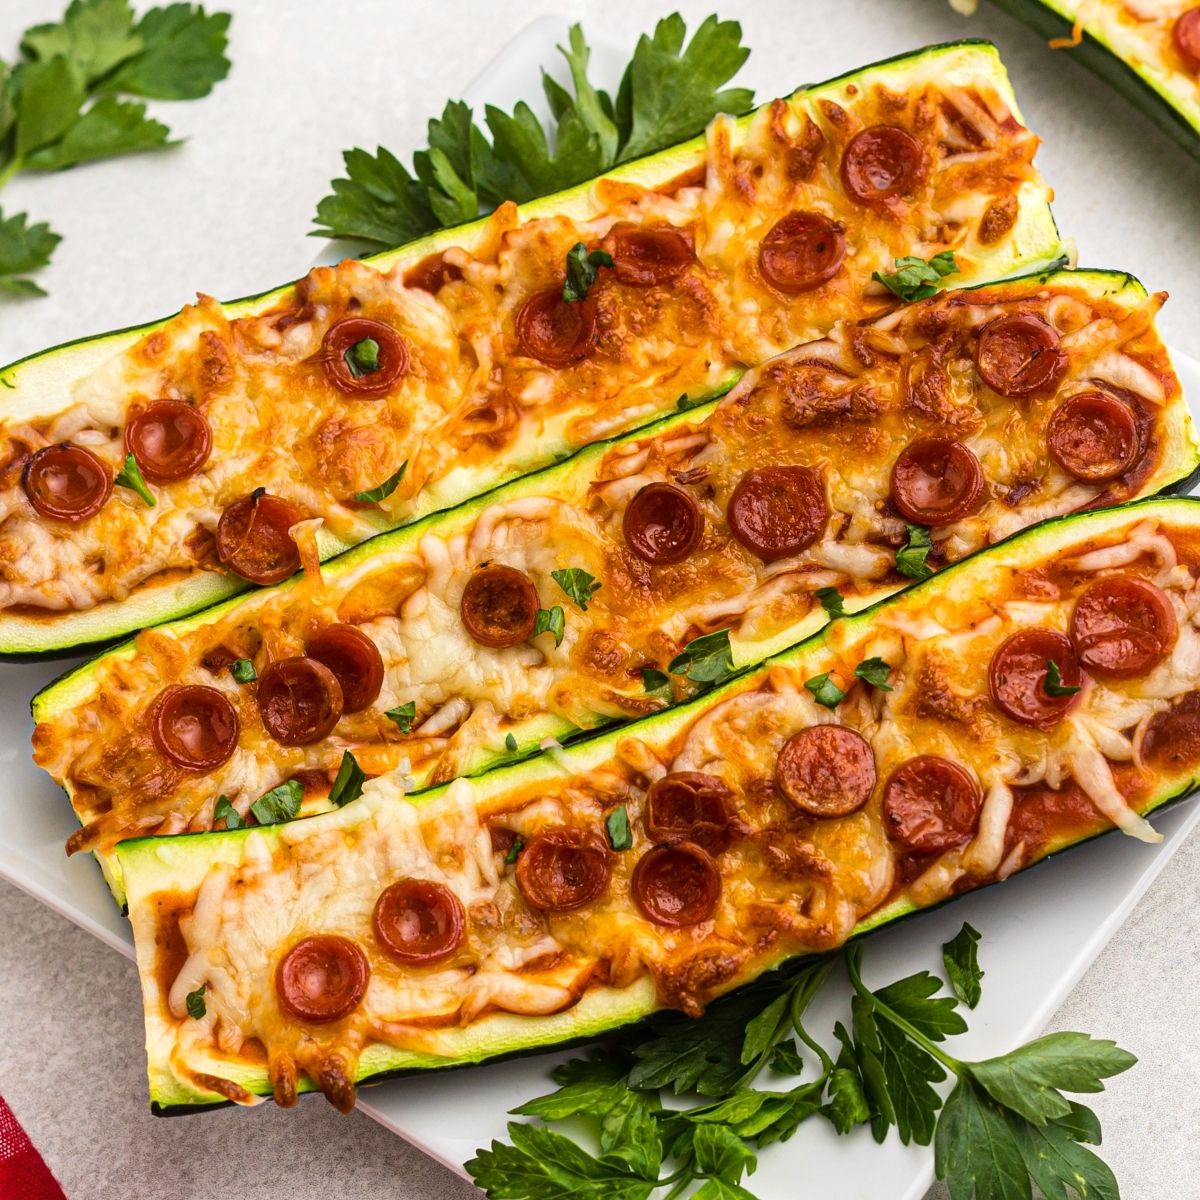 Golden cheesy zucchini boats on a white plate with parsley garnish